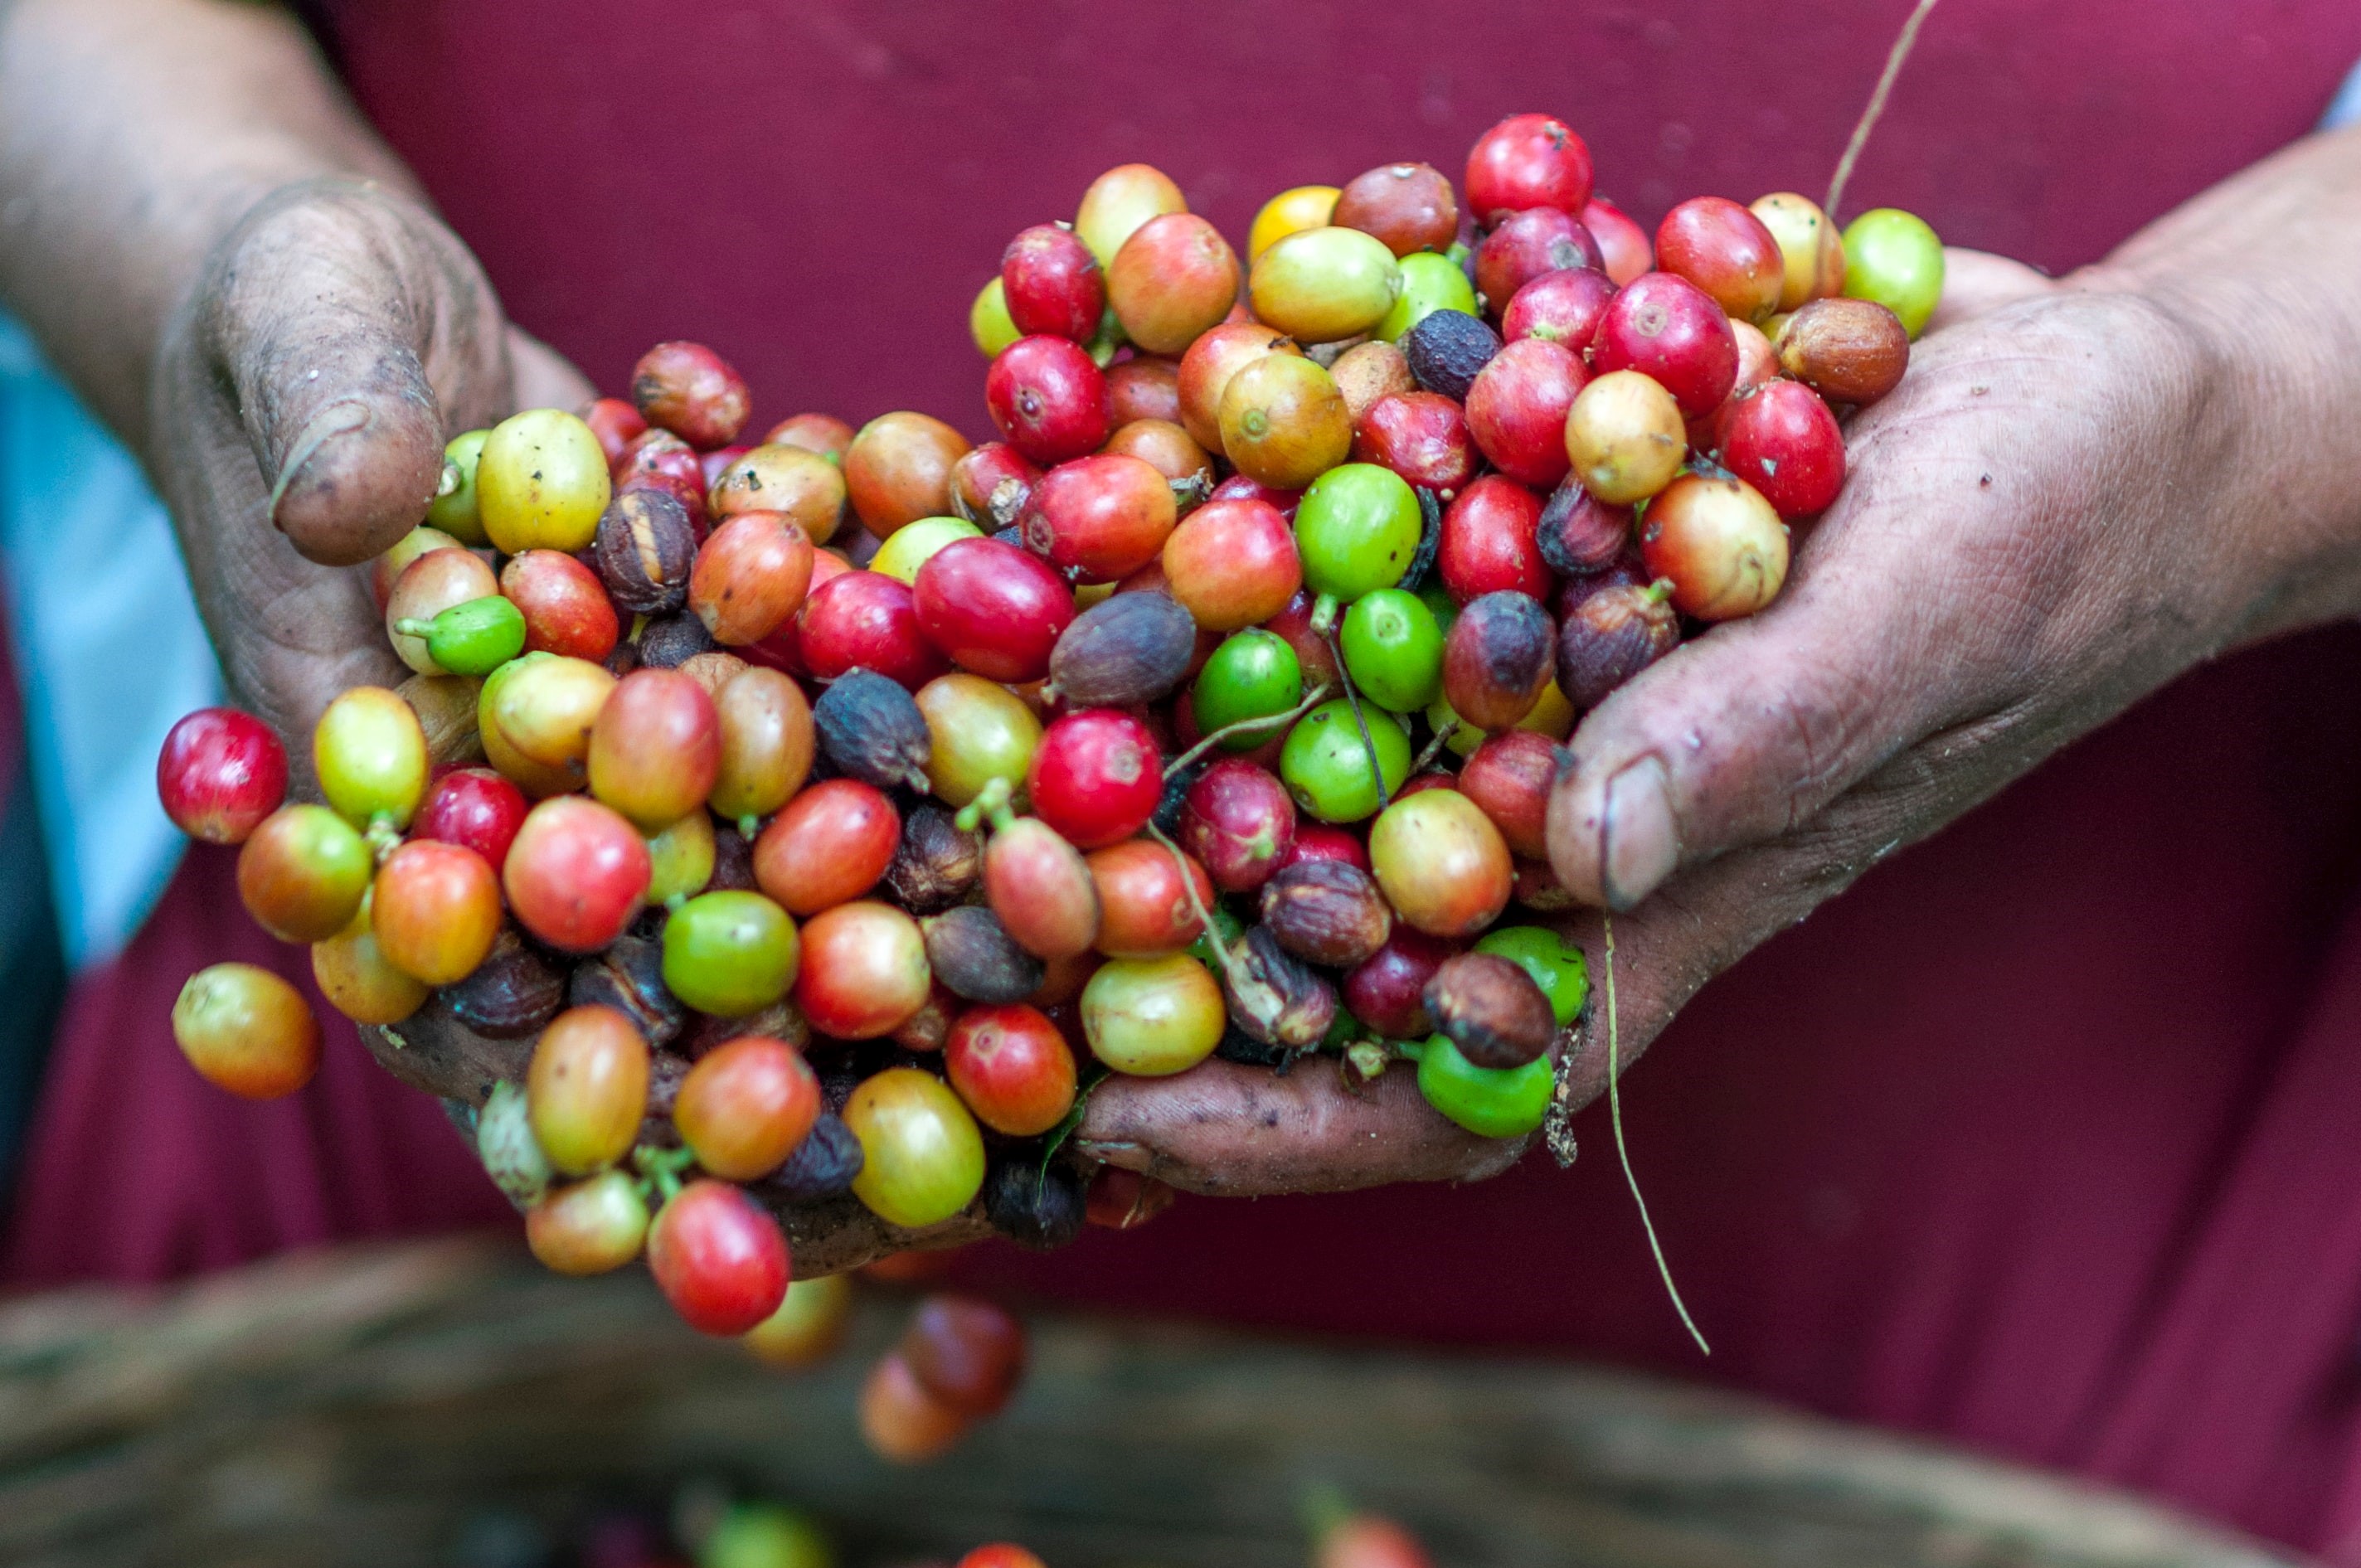 Hands holding ripe coffee beans